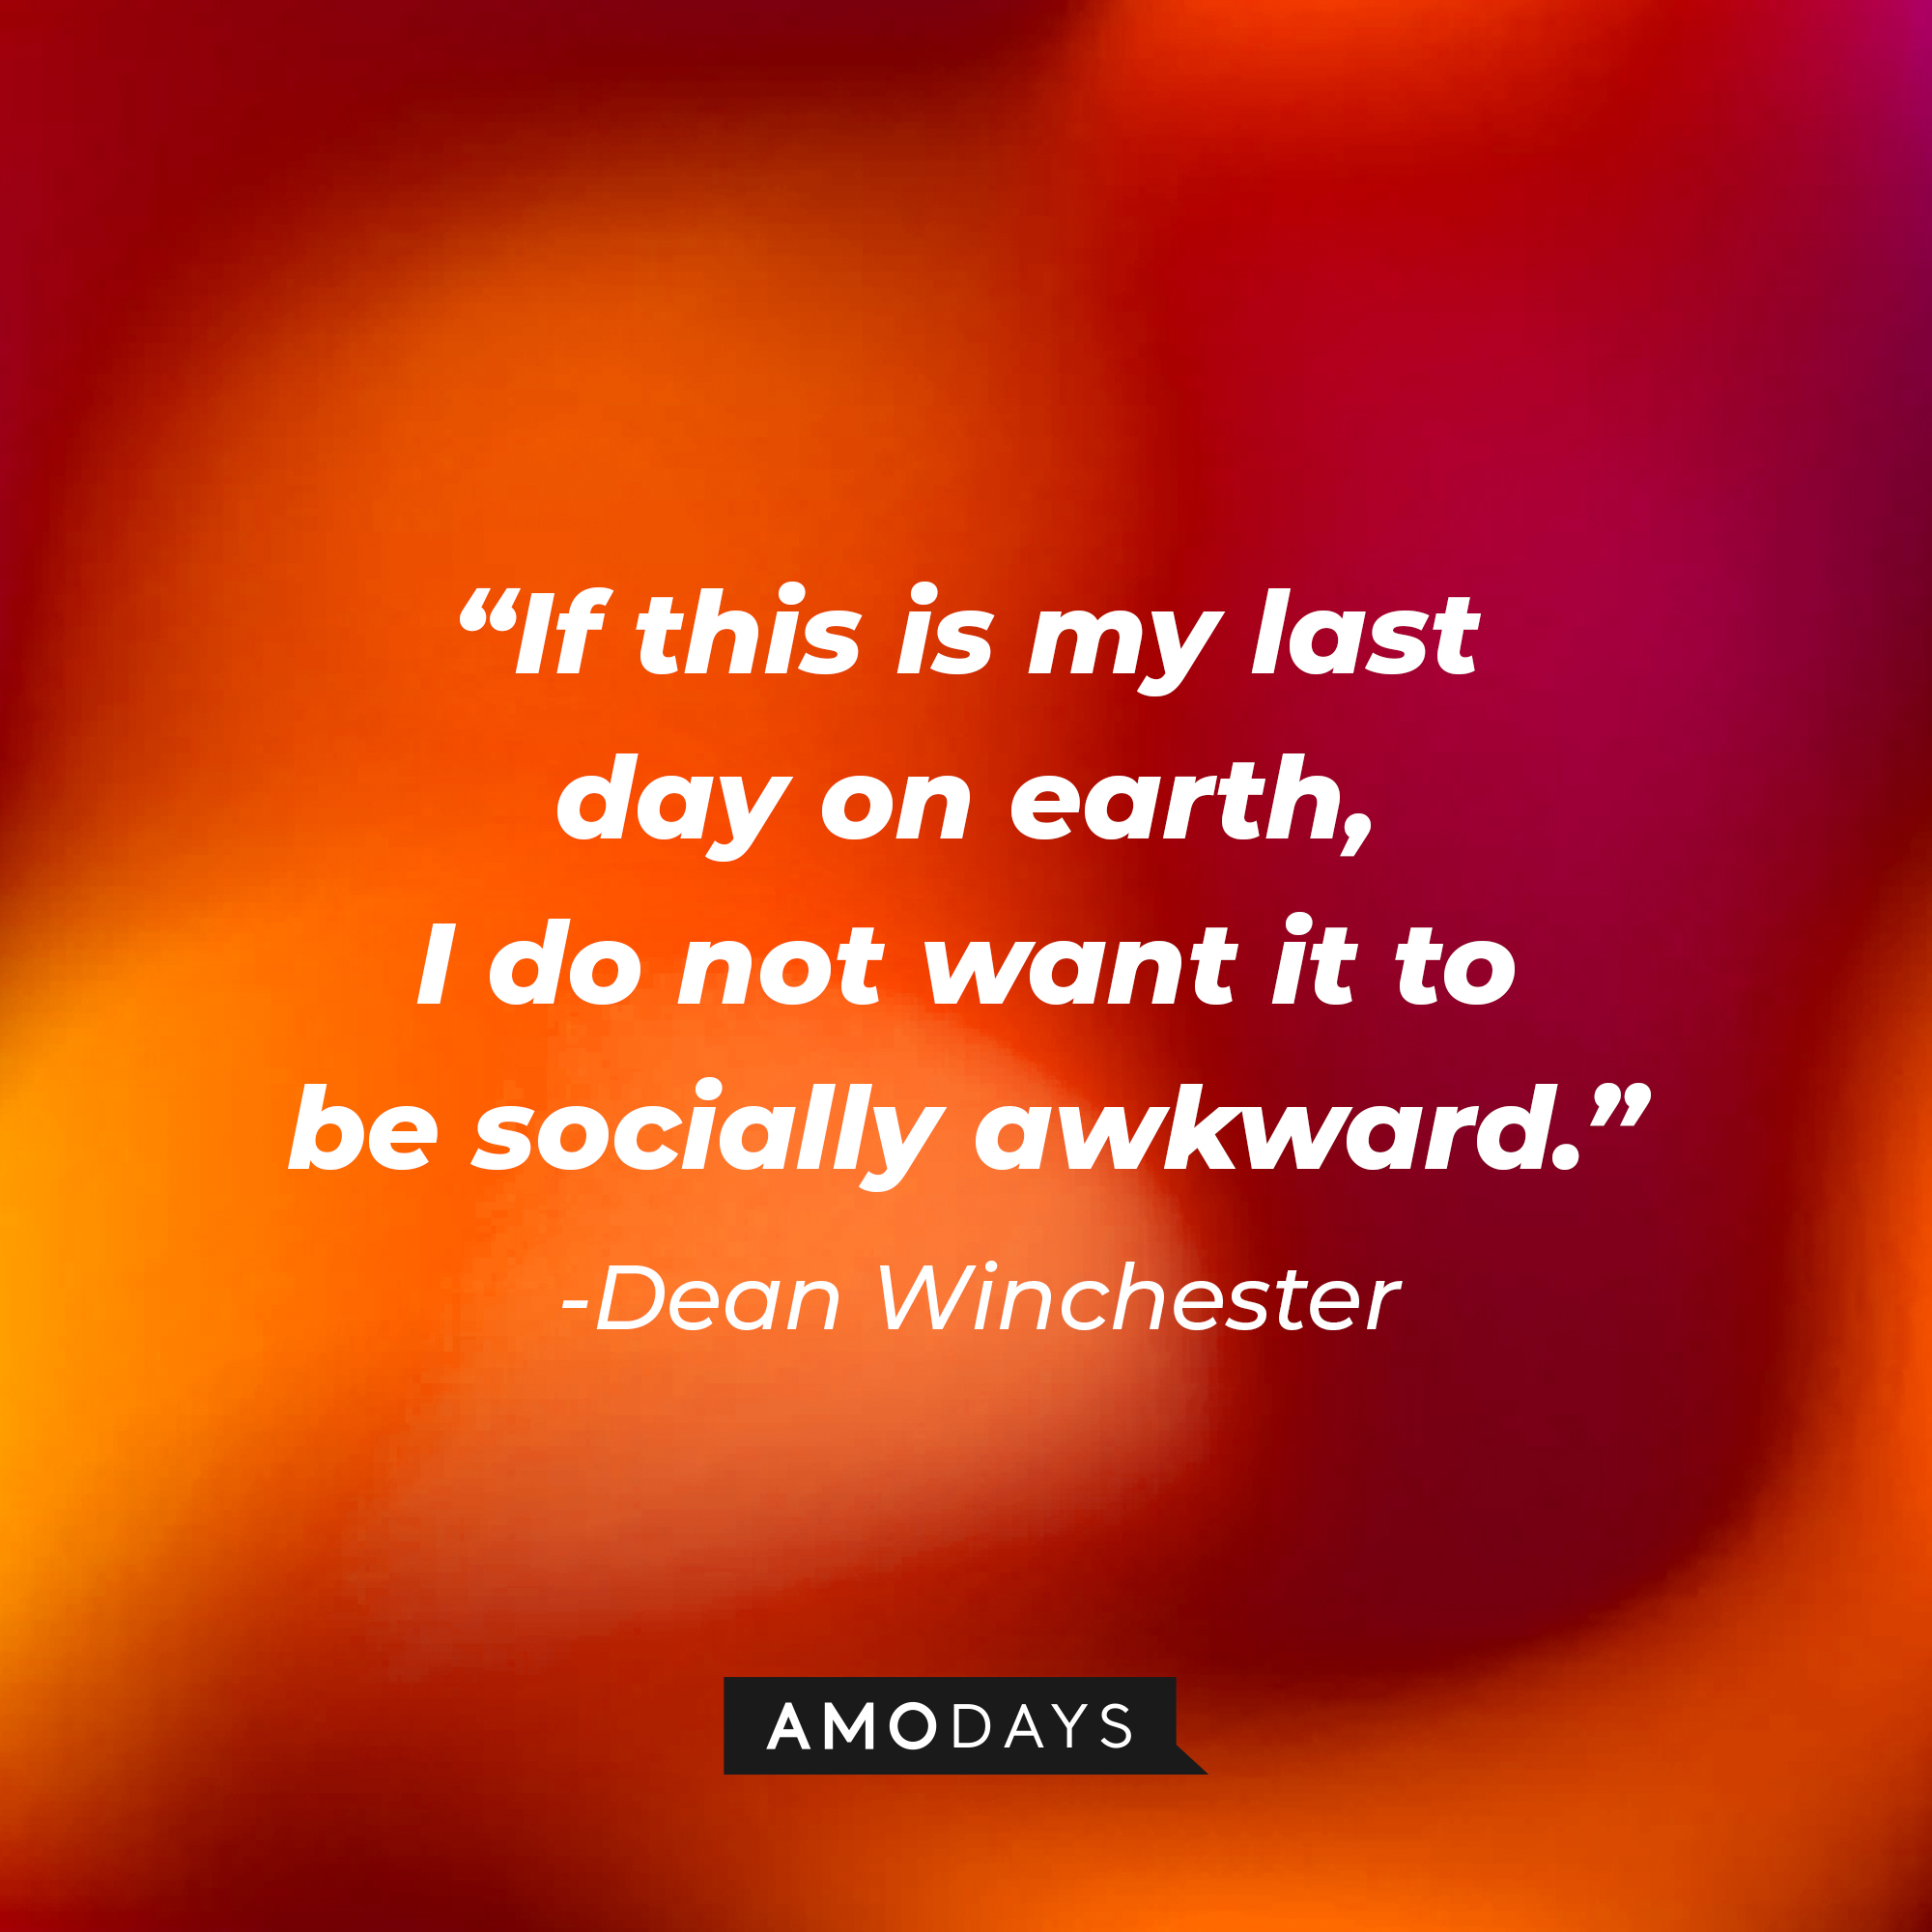 Dean Winchester’s quote: “If this is my last day on earth, I do not want it to be socially awkward.” | Source: AmoDays